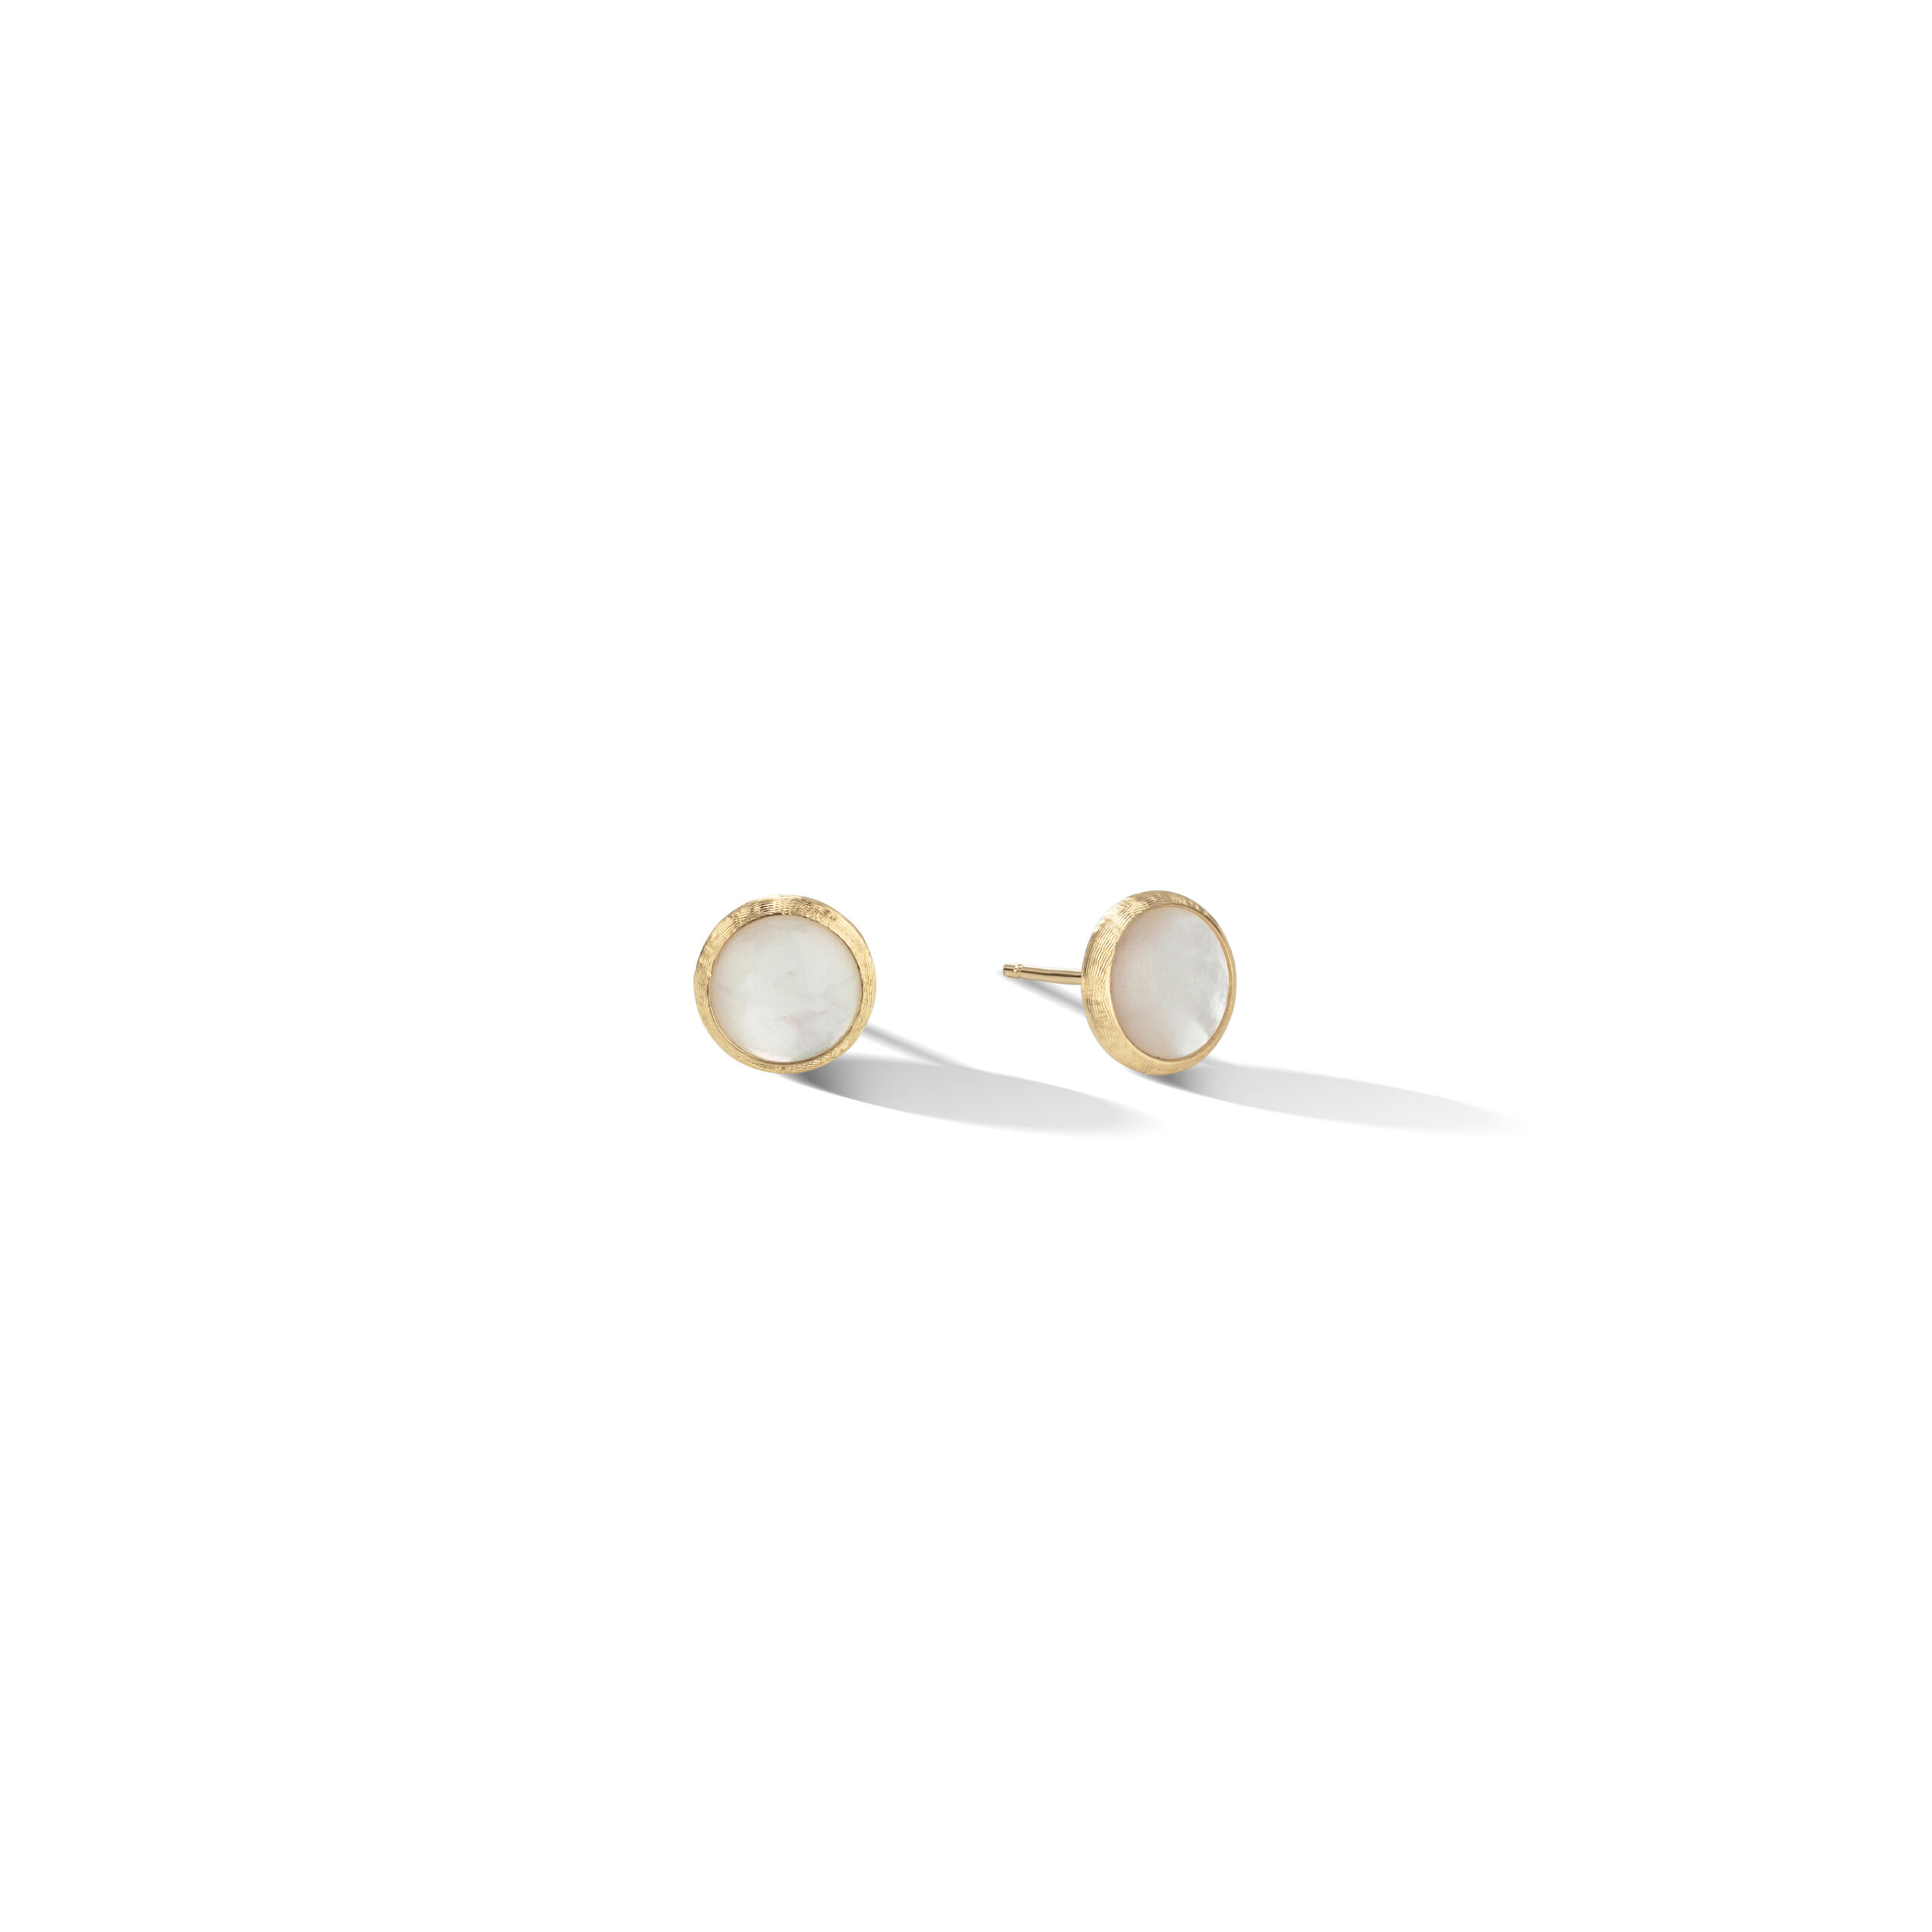 OB957 MPW Y 02Marco Bicego Jaipur Color Collection 18k Yellow Gold Mother of Pearl Stud Earrings